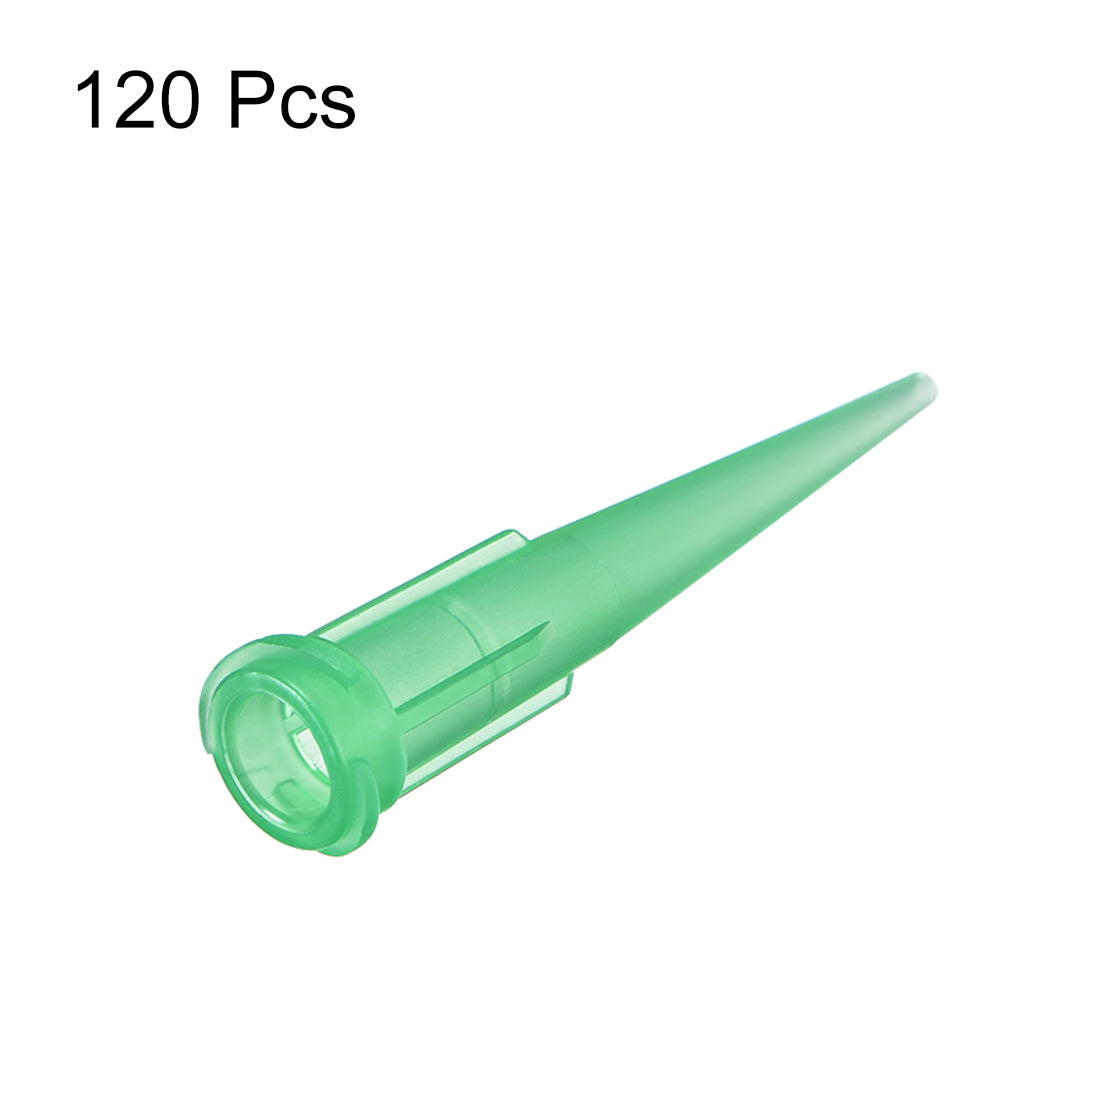 uxcell Uxcell Industrial Blunt Tip Tapered Dispensing Fill Needle 18ga X 1.26" Green 120pcs